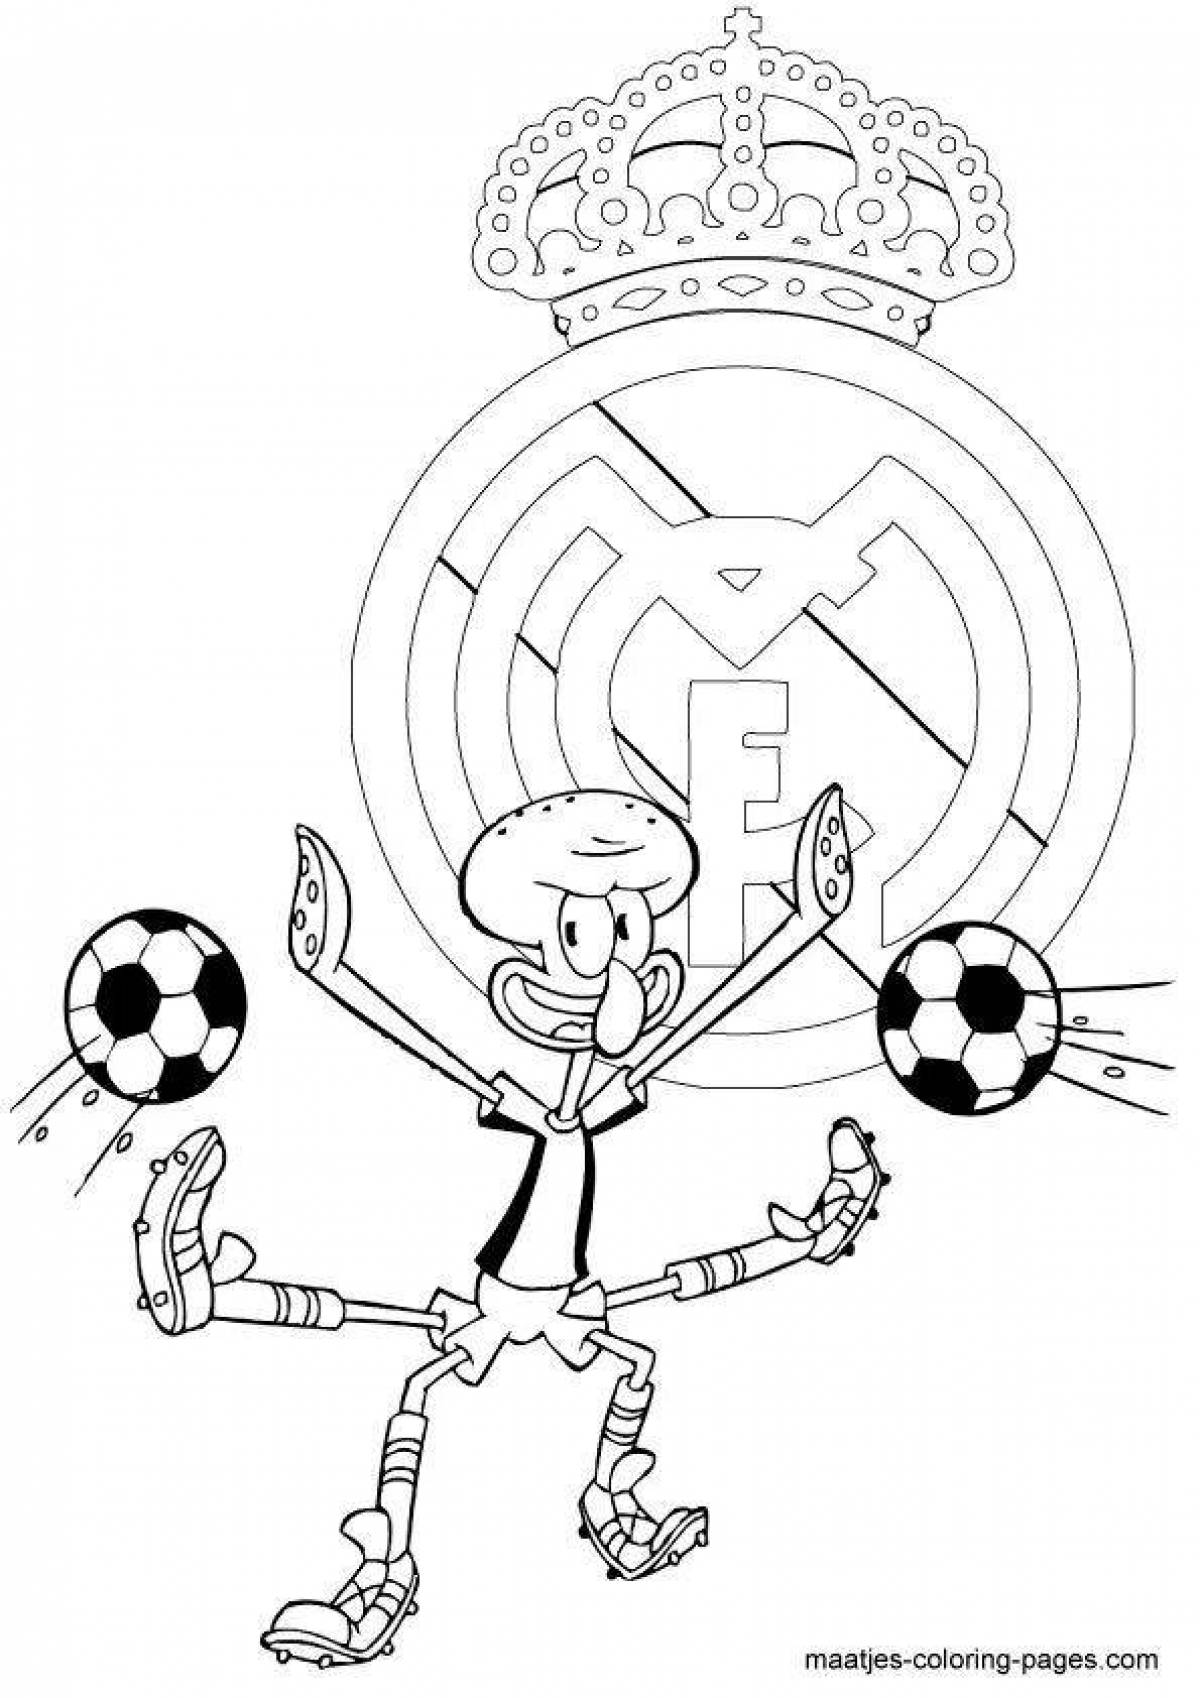 Attractive real madrid coloring page